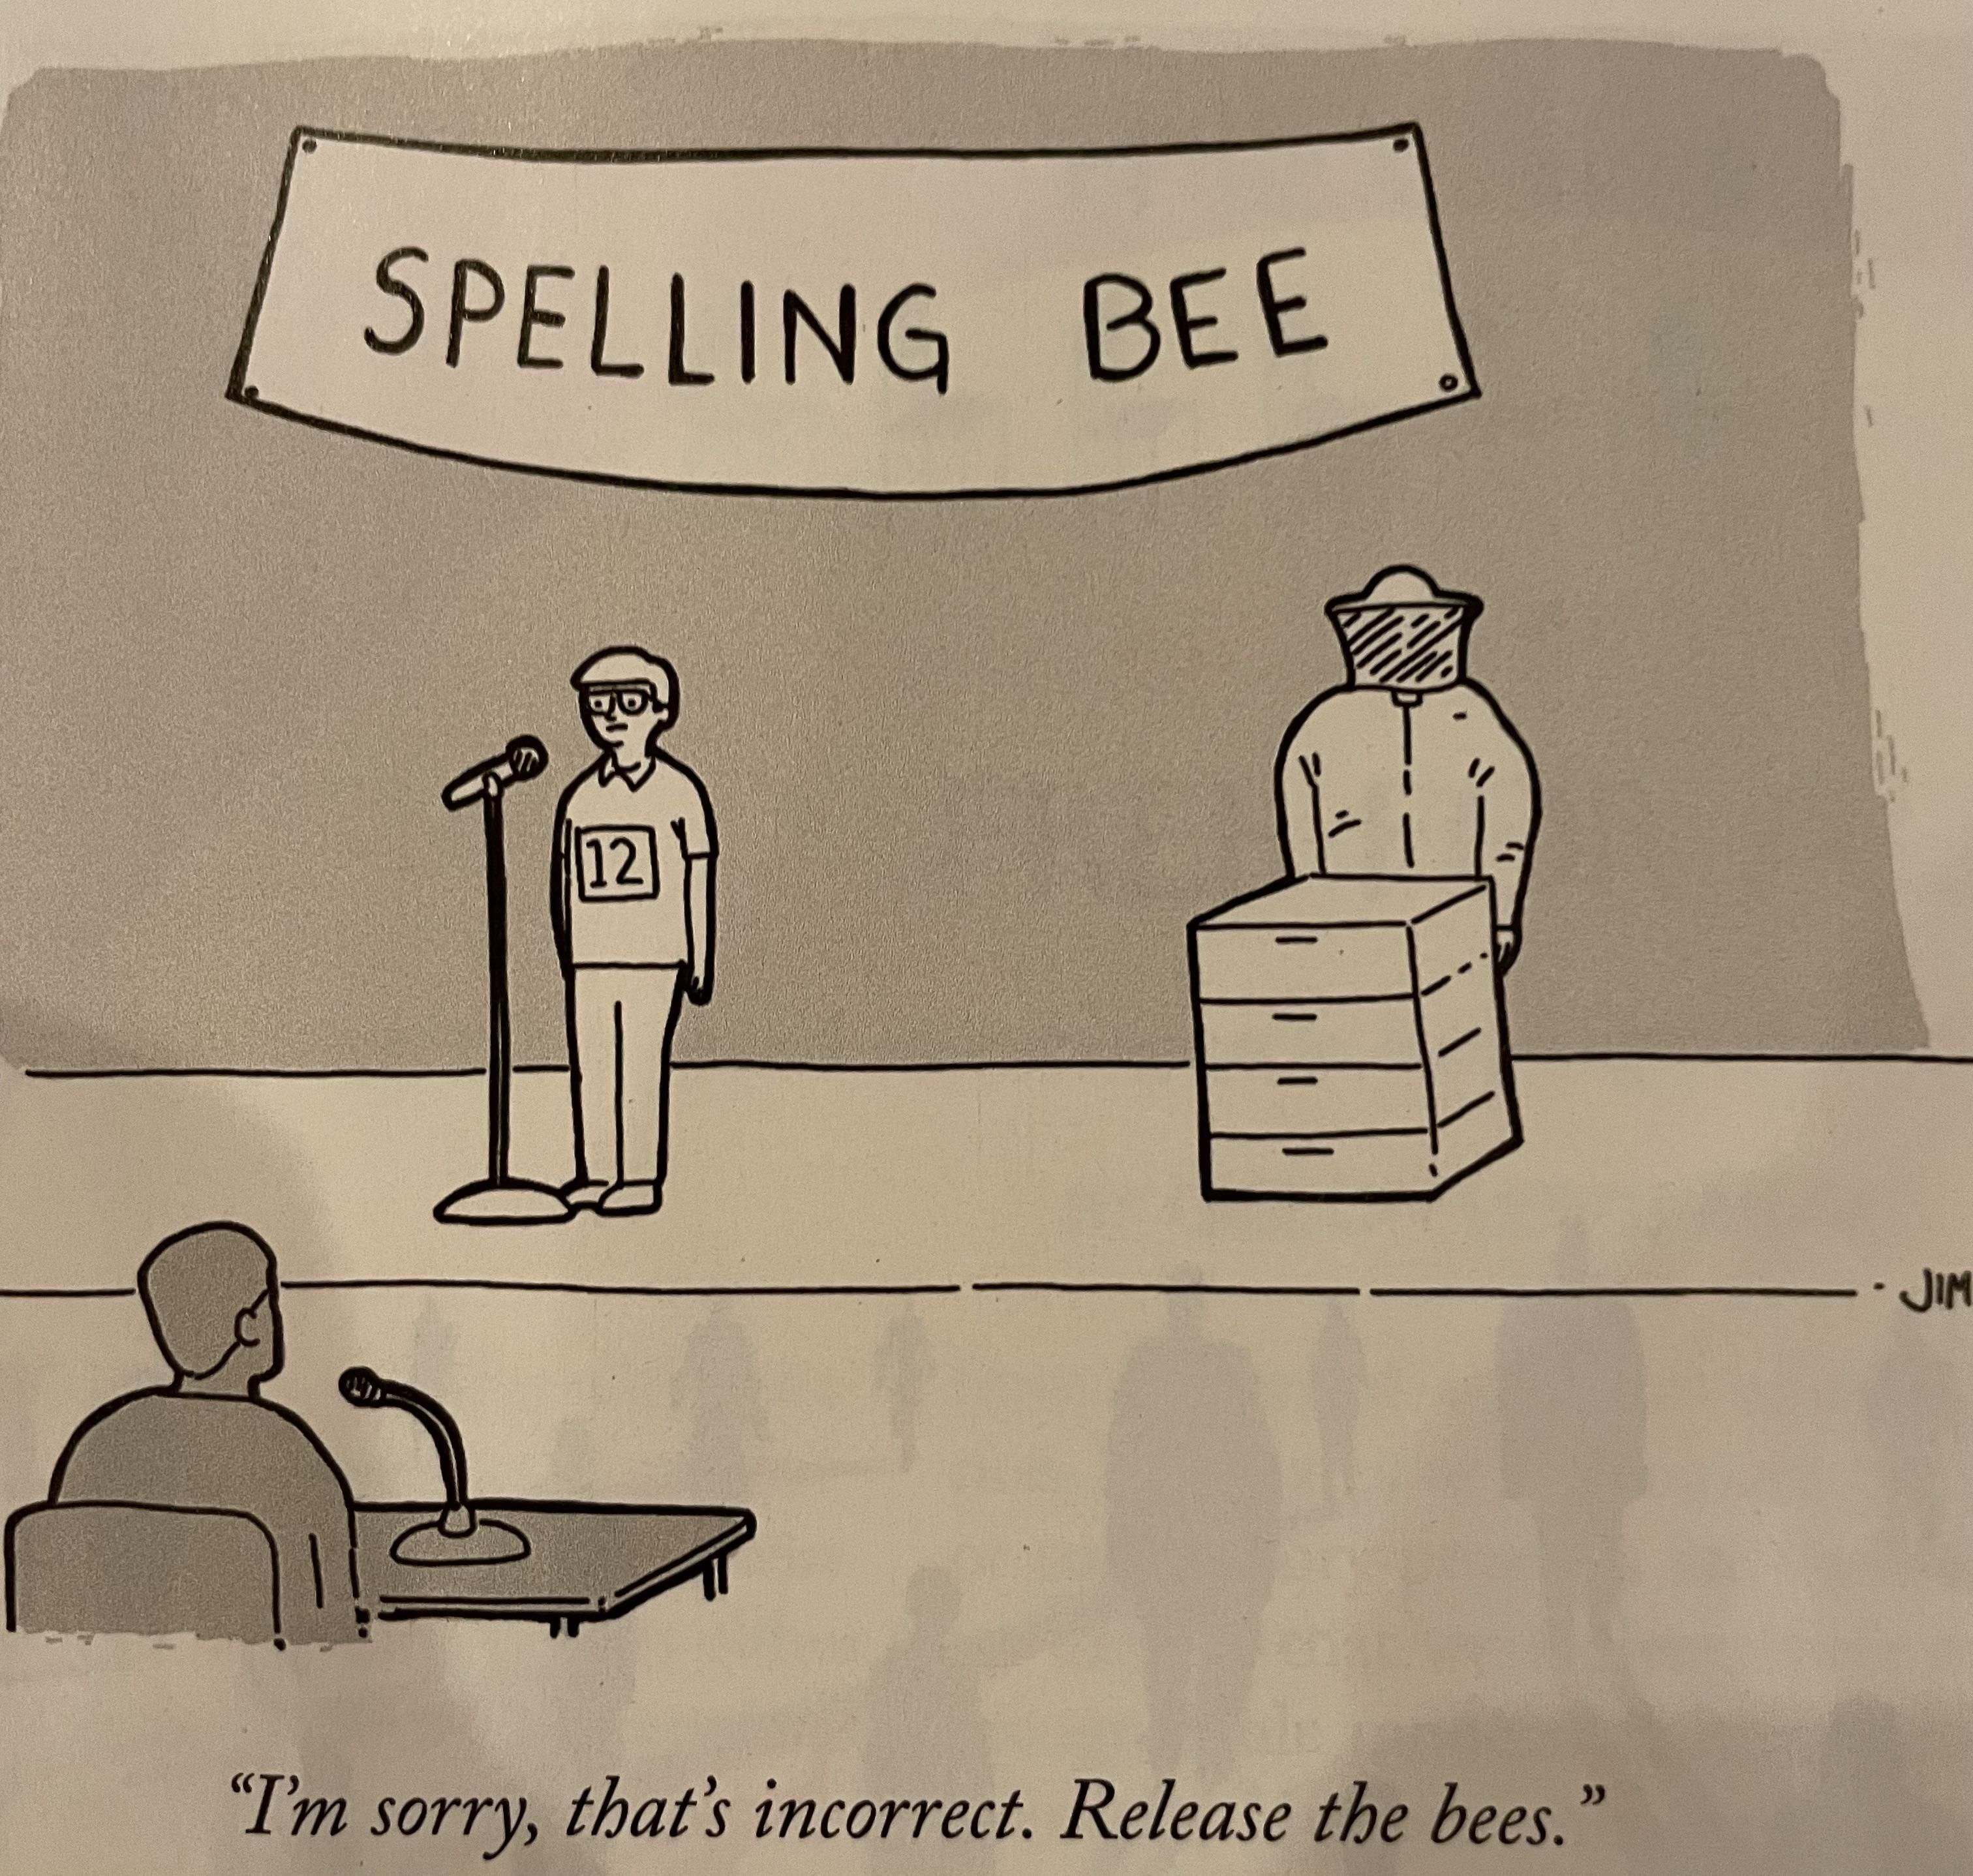 From this week’s New Yorker